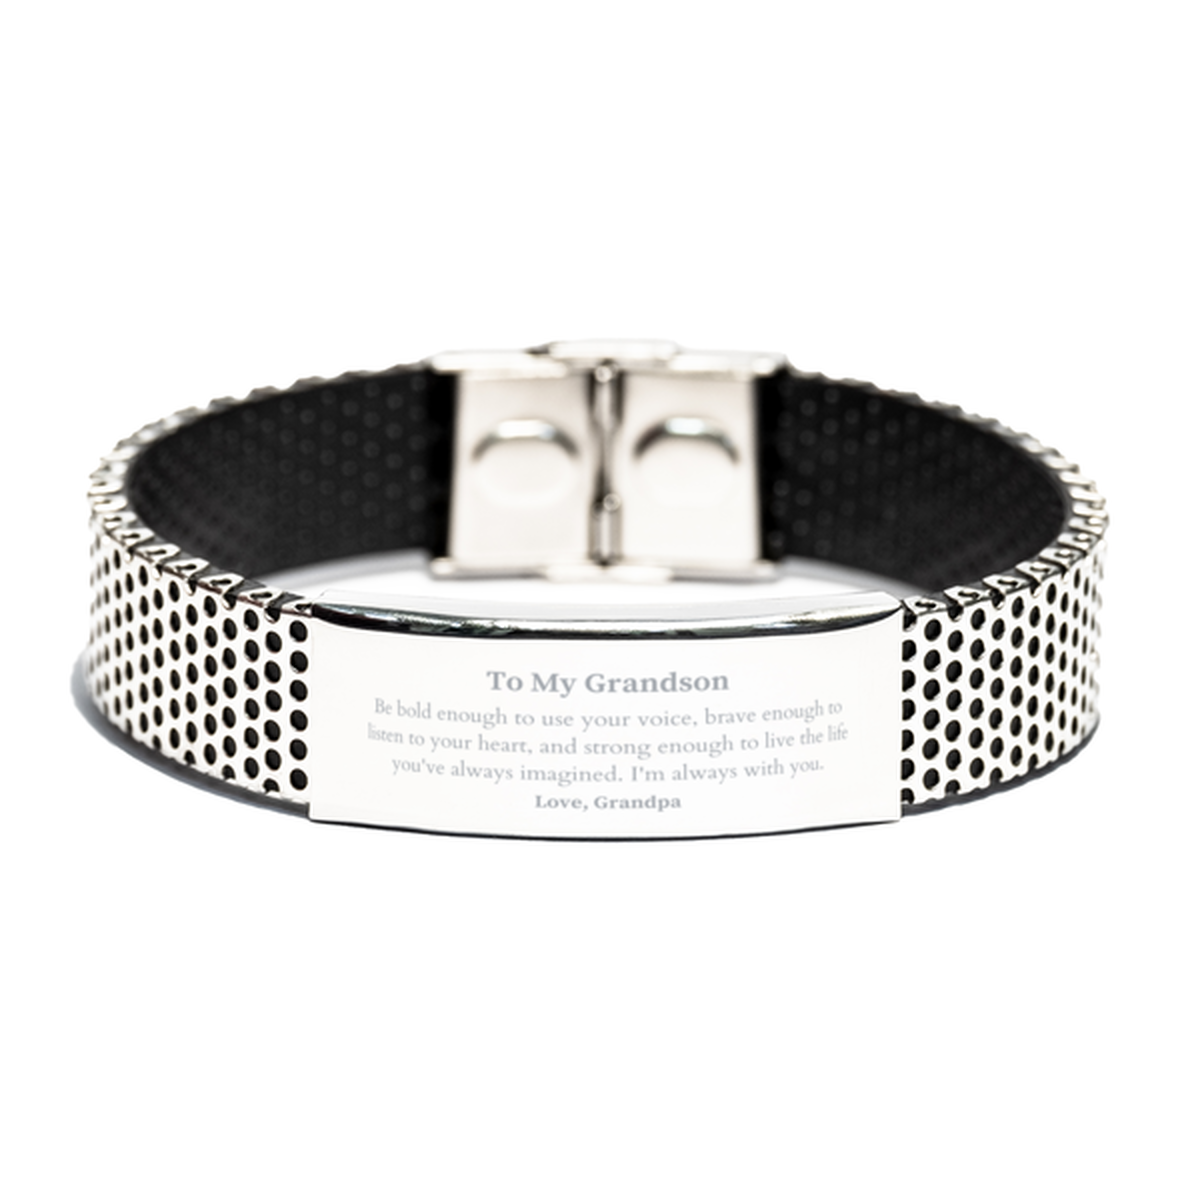 Keepsake Grandson Stainless Steel Bracelet Gift Idea Graduation Christmas Birthday Grandson from Grandpa, Grandson Be bold enough to use your voice, brave enough to listen to your heart. Love, Grandpa